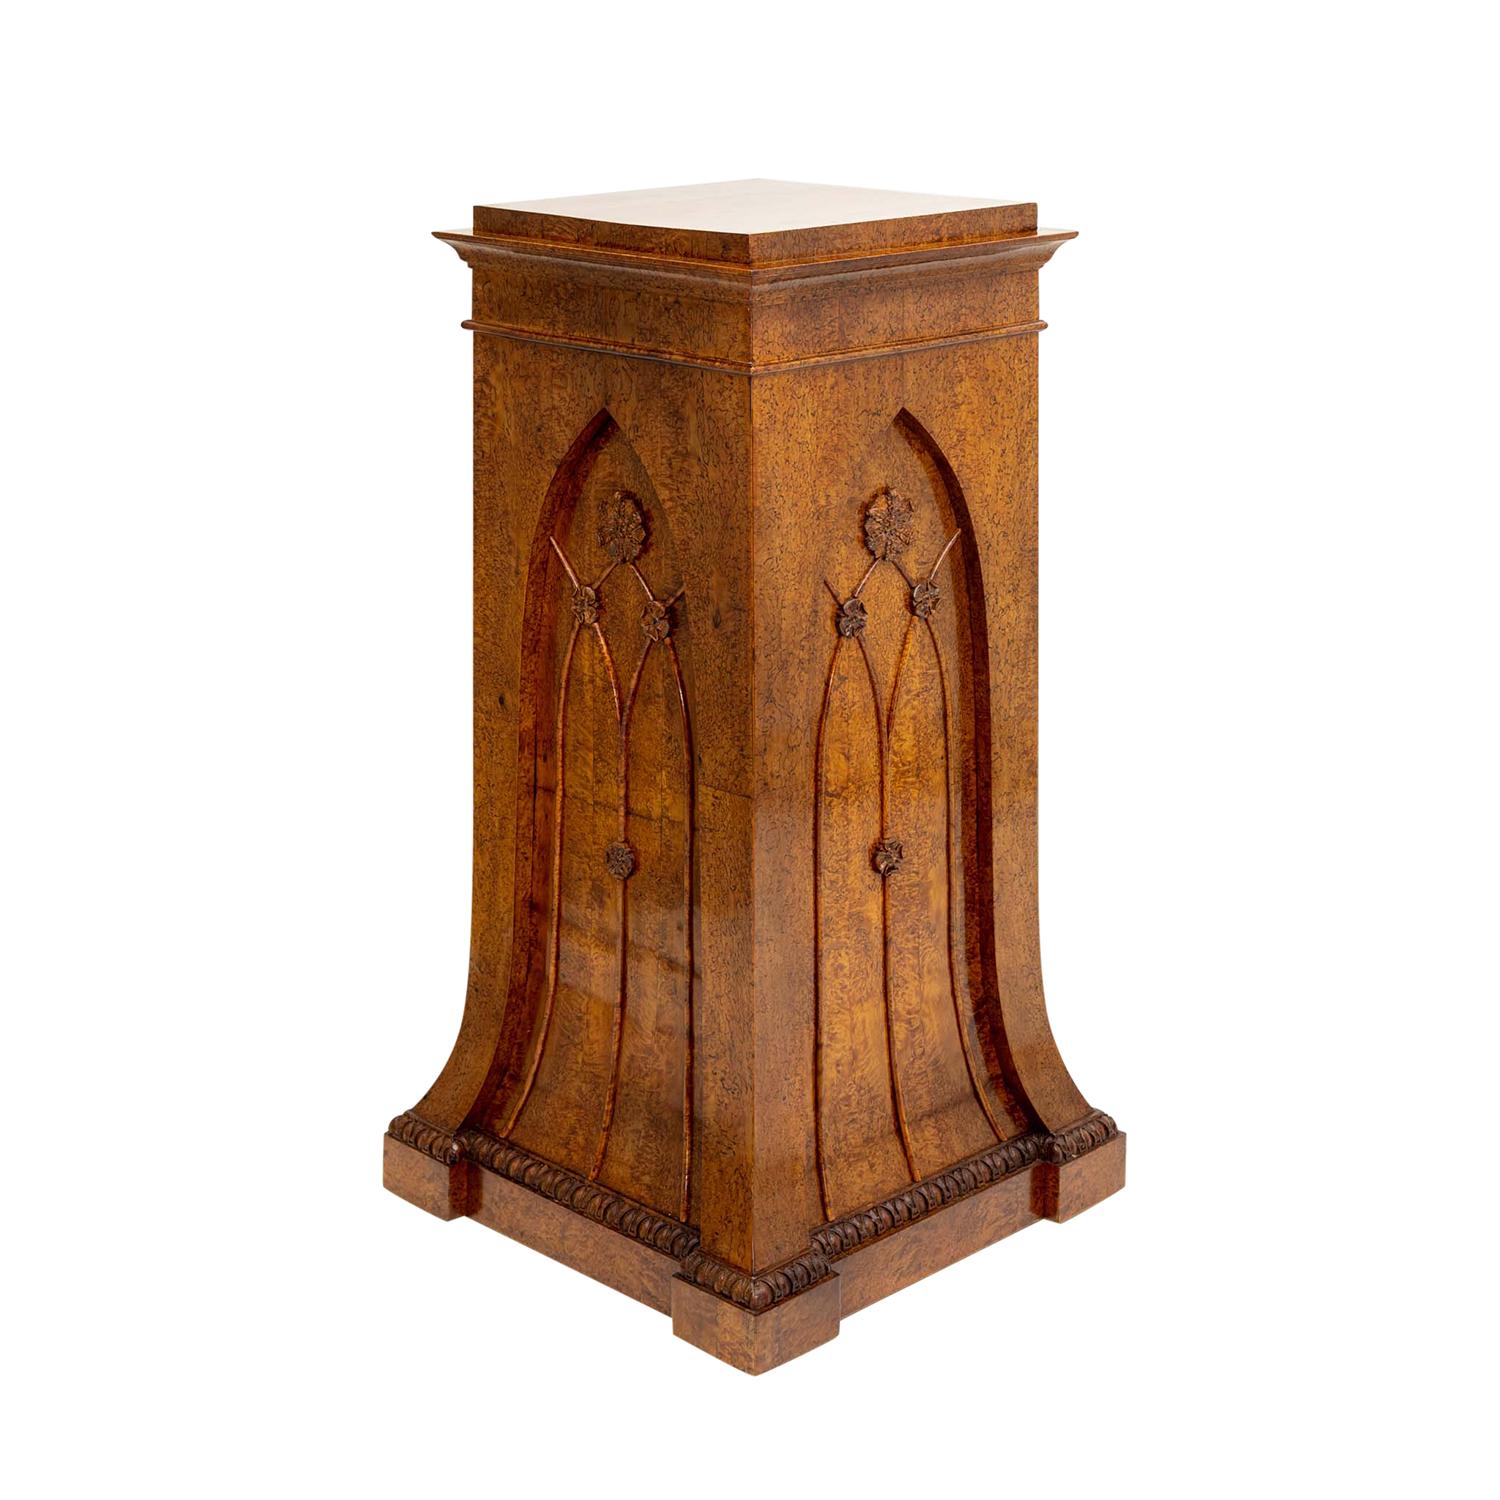 A 19th Century, antique German Biedermeier single pedestal made of hand crafted shellac polished, partly veneered Birchwood in good condition. The detailed center furniture, podium is enhanced on each side by flower carvings. Wear consistent with